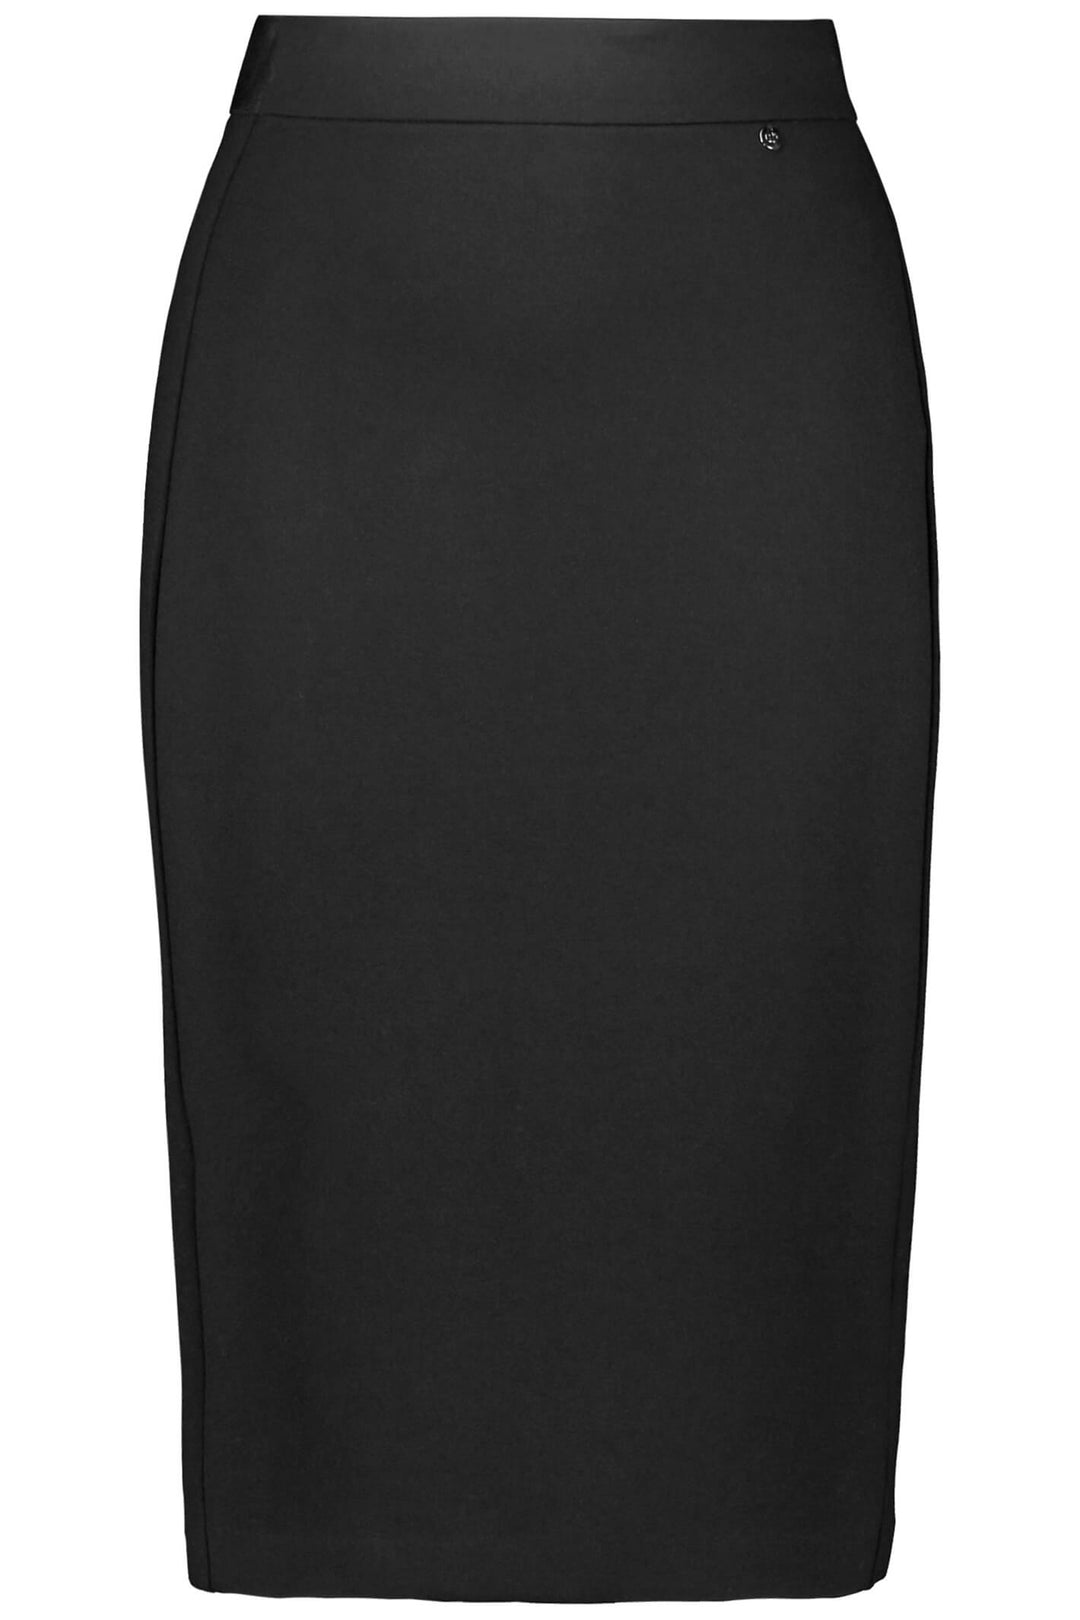 Gerry Weber 111022-66311 Black Knee Length Pull-On Pencil Skirt - Dotique Chesterfield